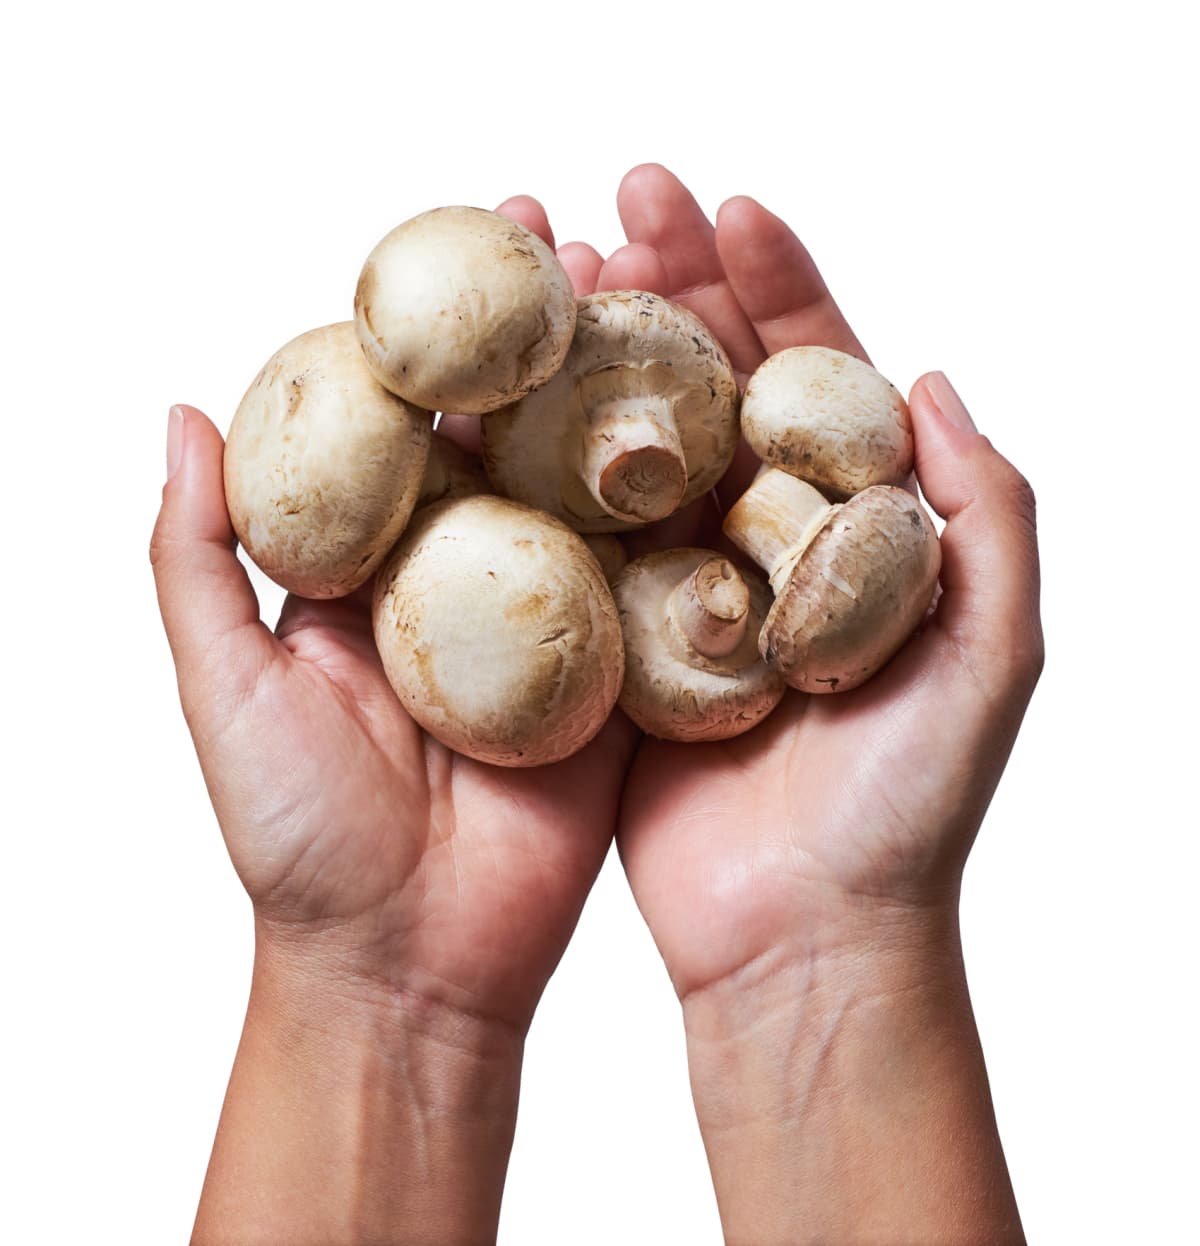 Top view of multiple mushrooms on human hands